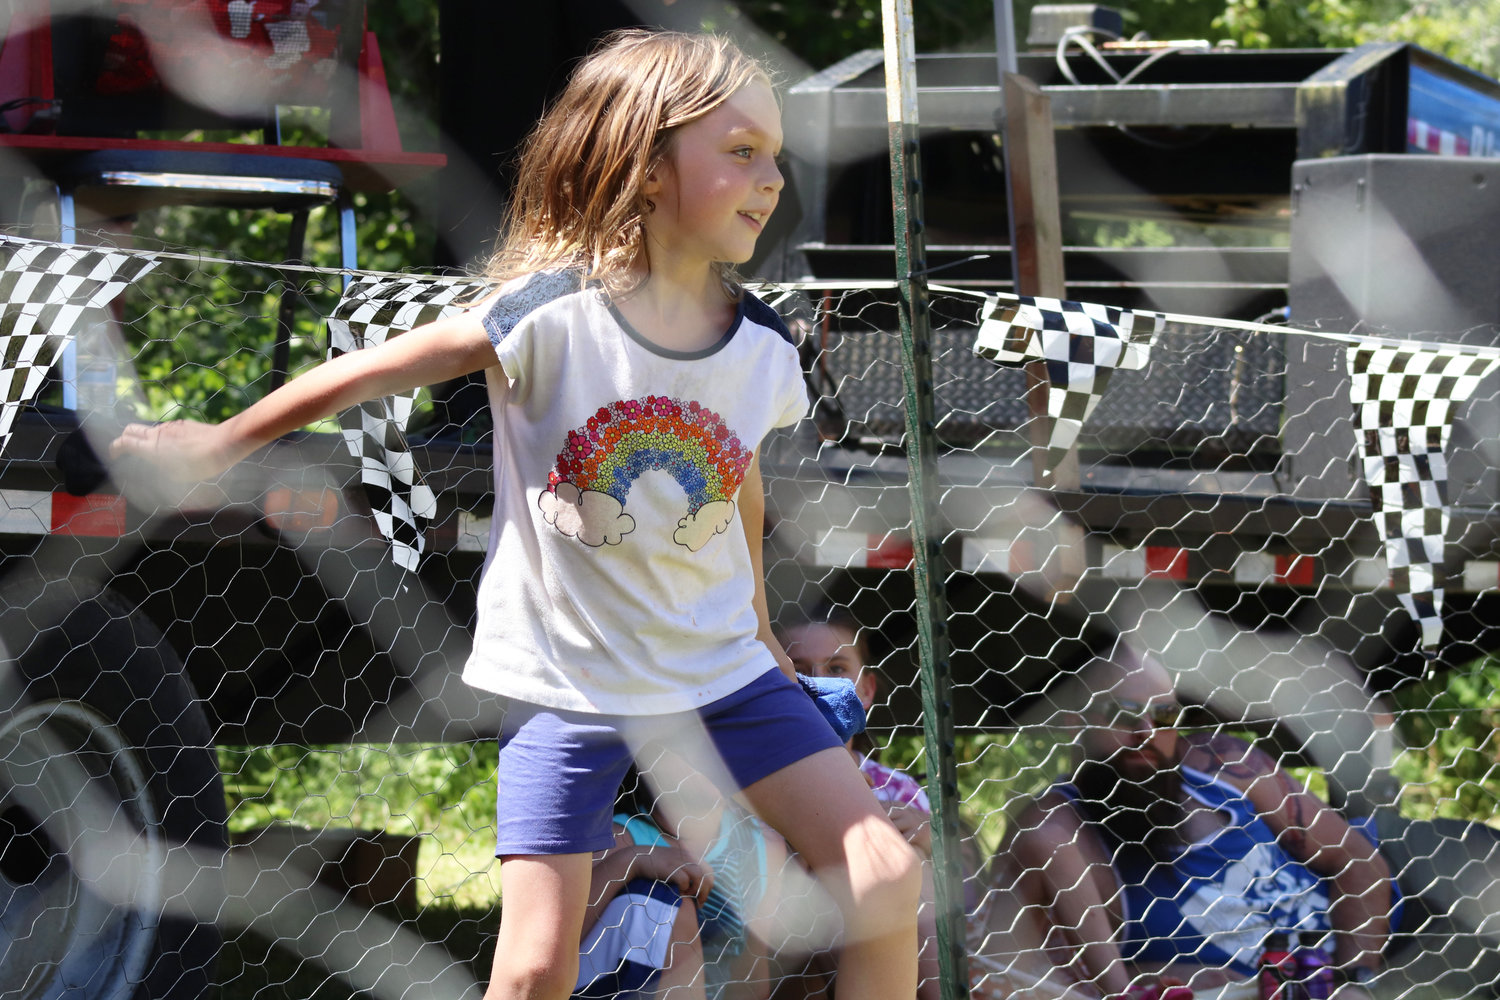 Athena, 6, prepares to launch a pair of socks at a chicken during Independence Valley Community Hall’s 42nd Annual Chicken Races in Rochester on Sunday.